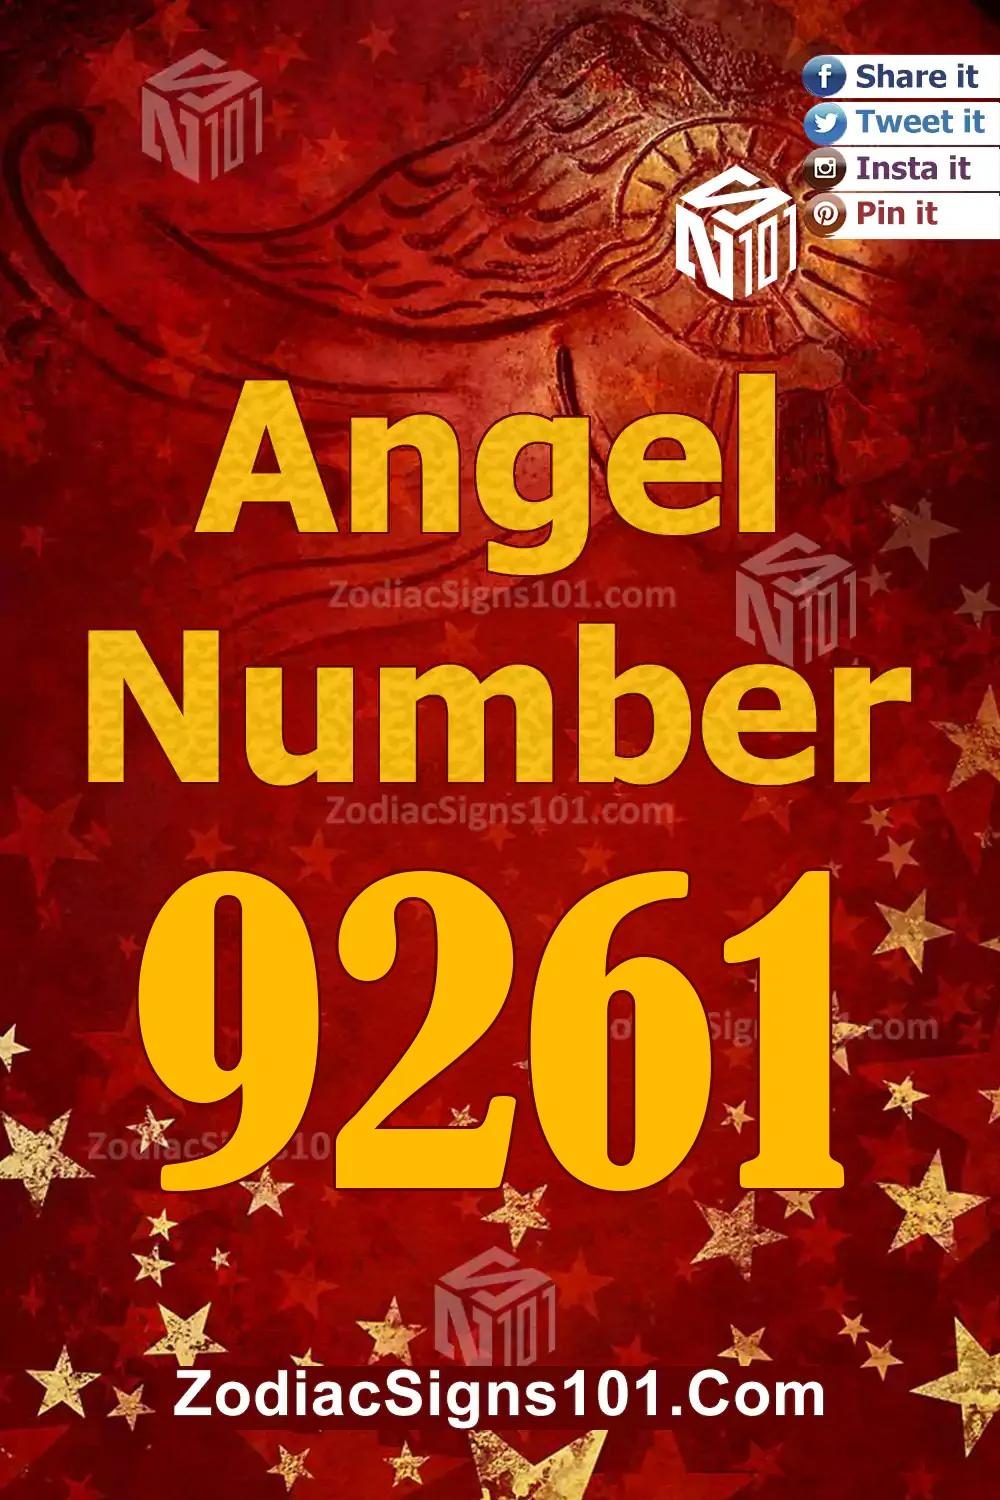 9261 Angel Number Meaning